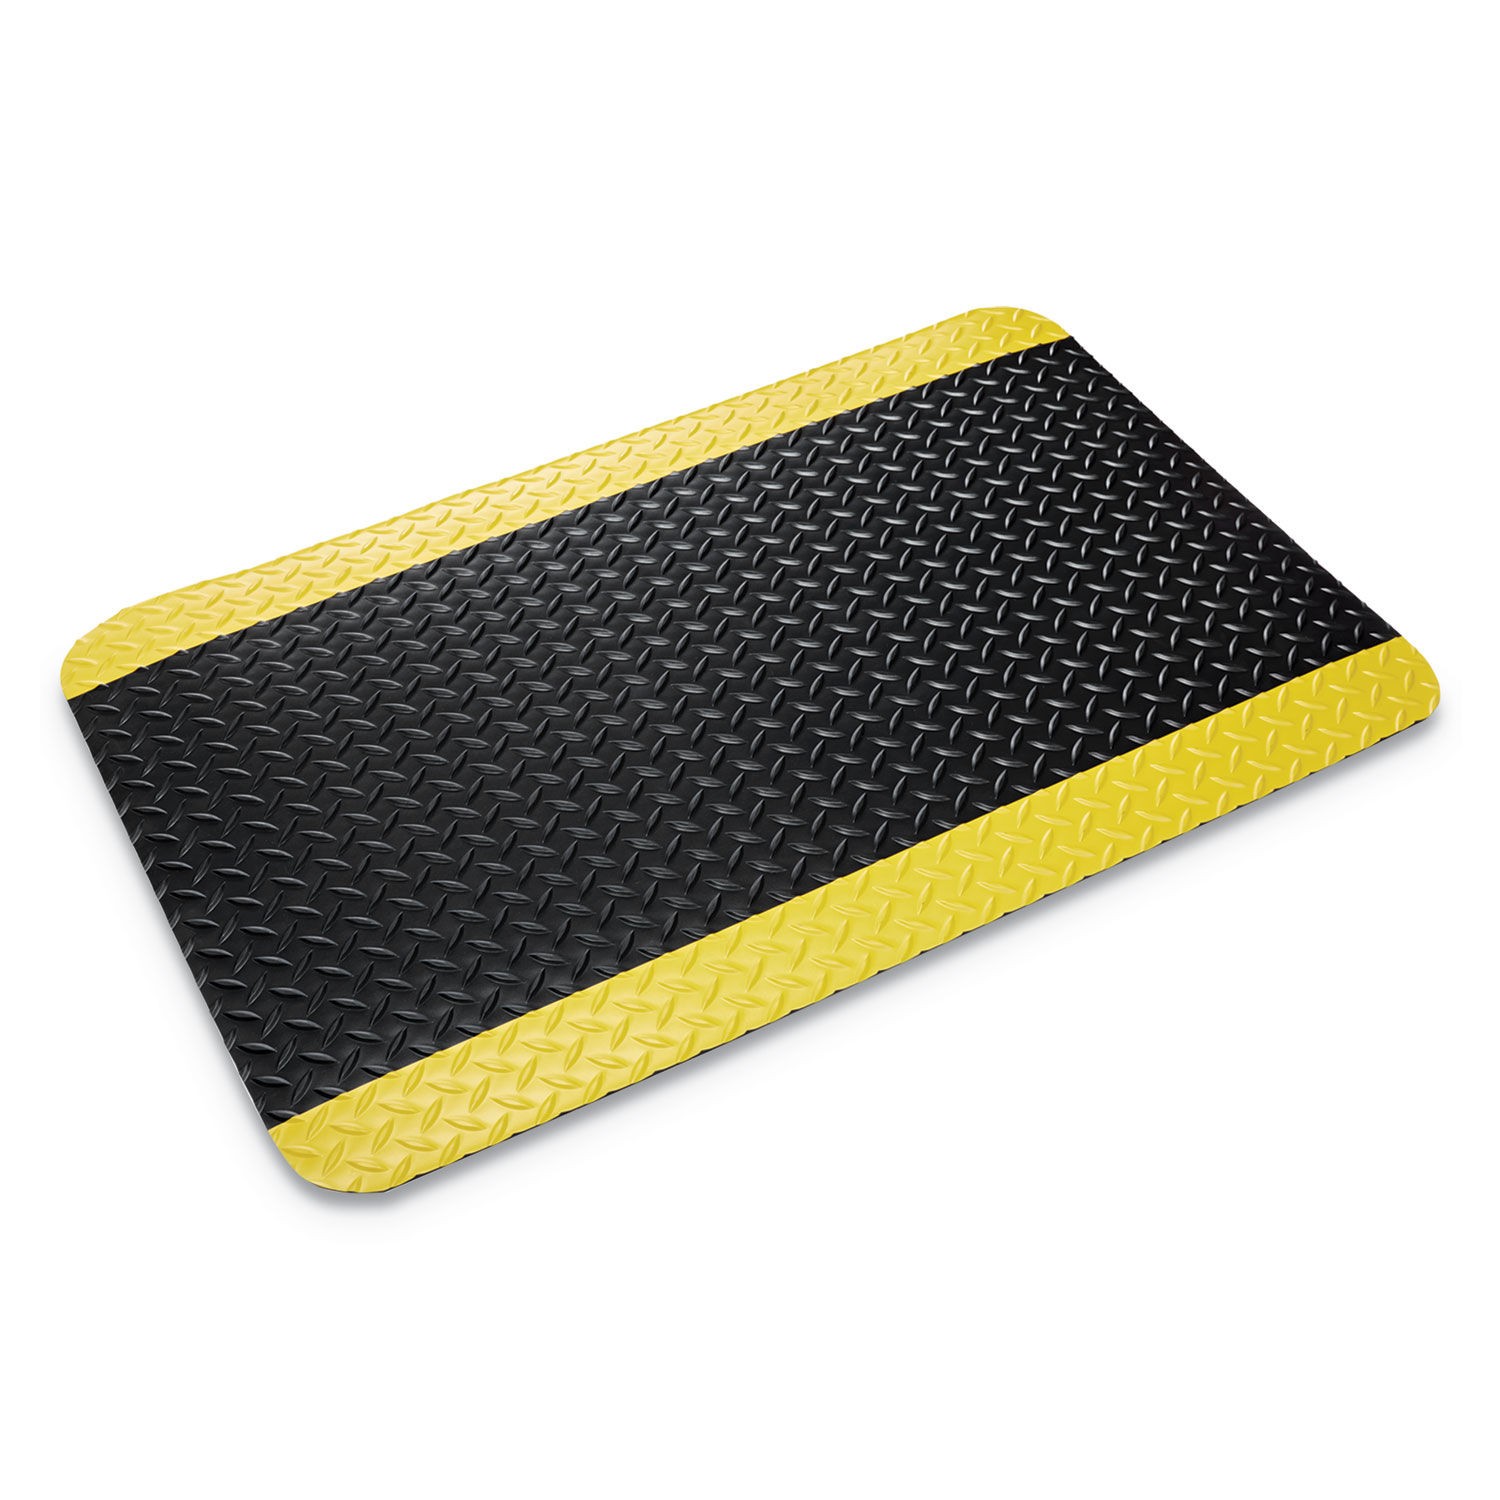 https://www.lionsdeal.com/itempics/Crown-Deck-Plate-with-Yellow-Border--3--X5---Box-of-1--17005_xlarge.jpg